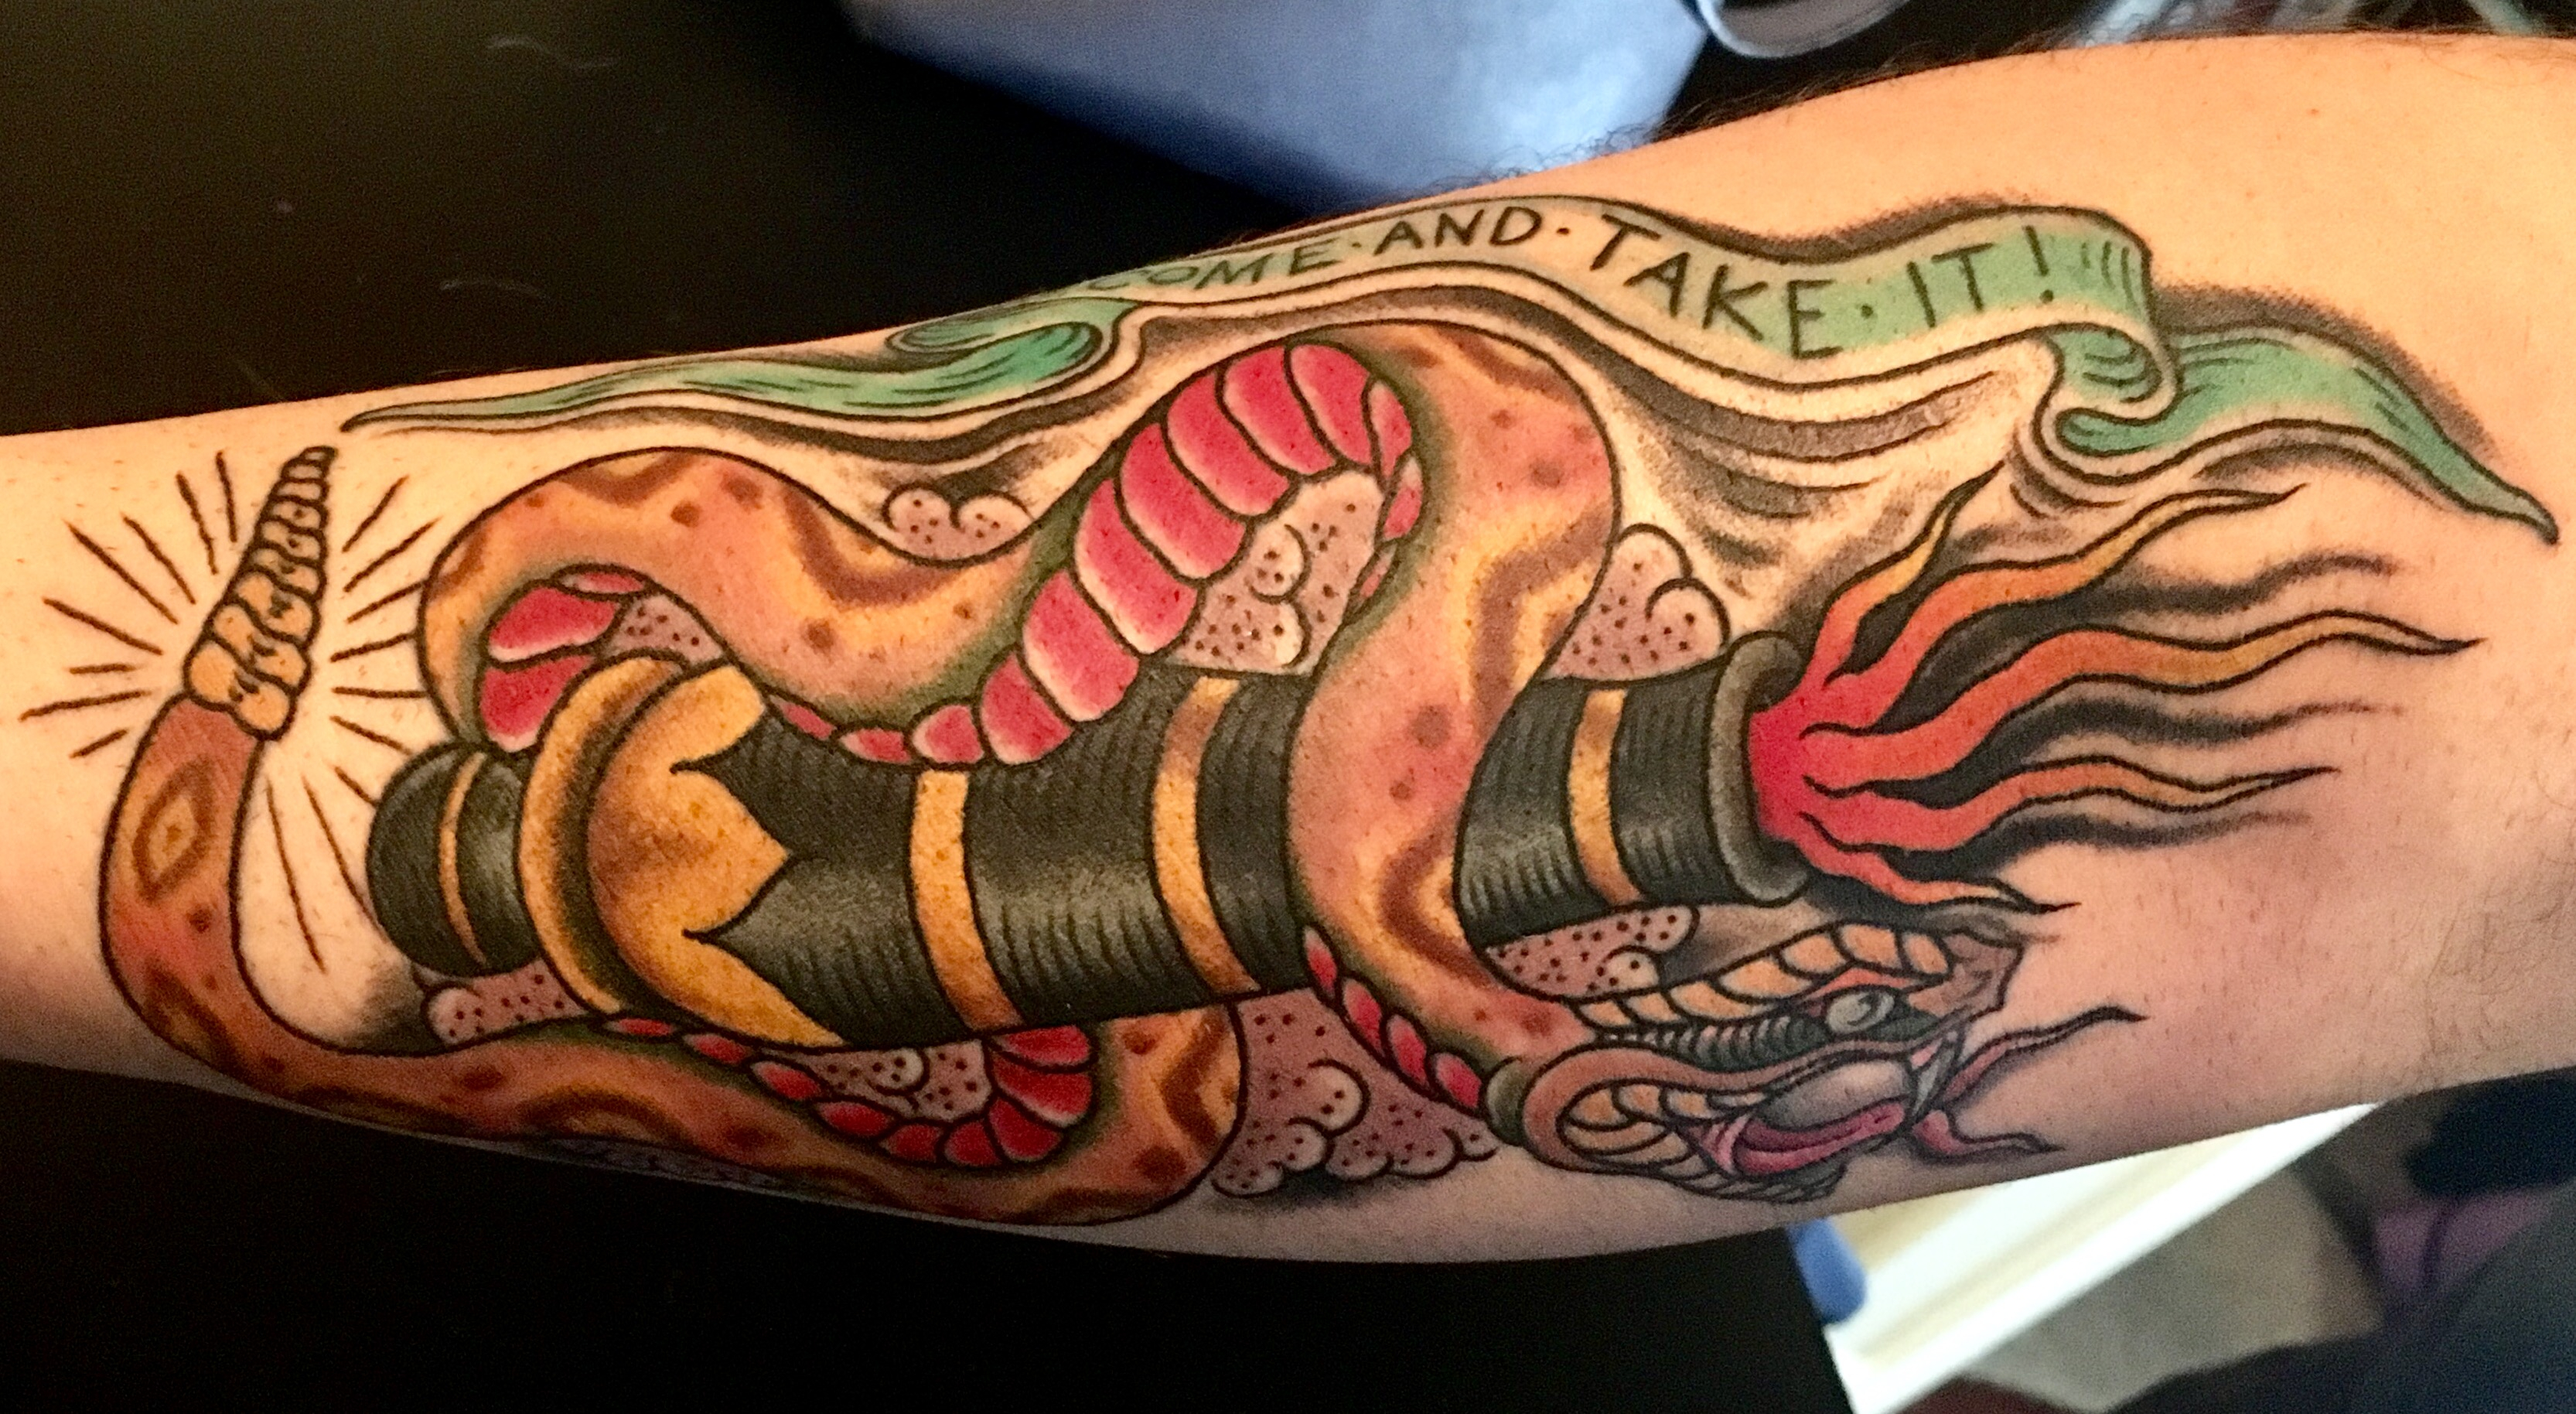 Unique Come And Take It Tattoo Album On Imgur For You - Come And Take It Cannon Tattoo , HD Wallpaper & Backgrounds